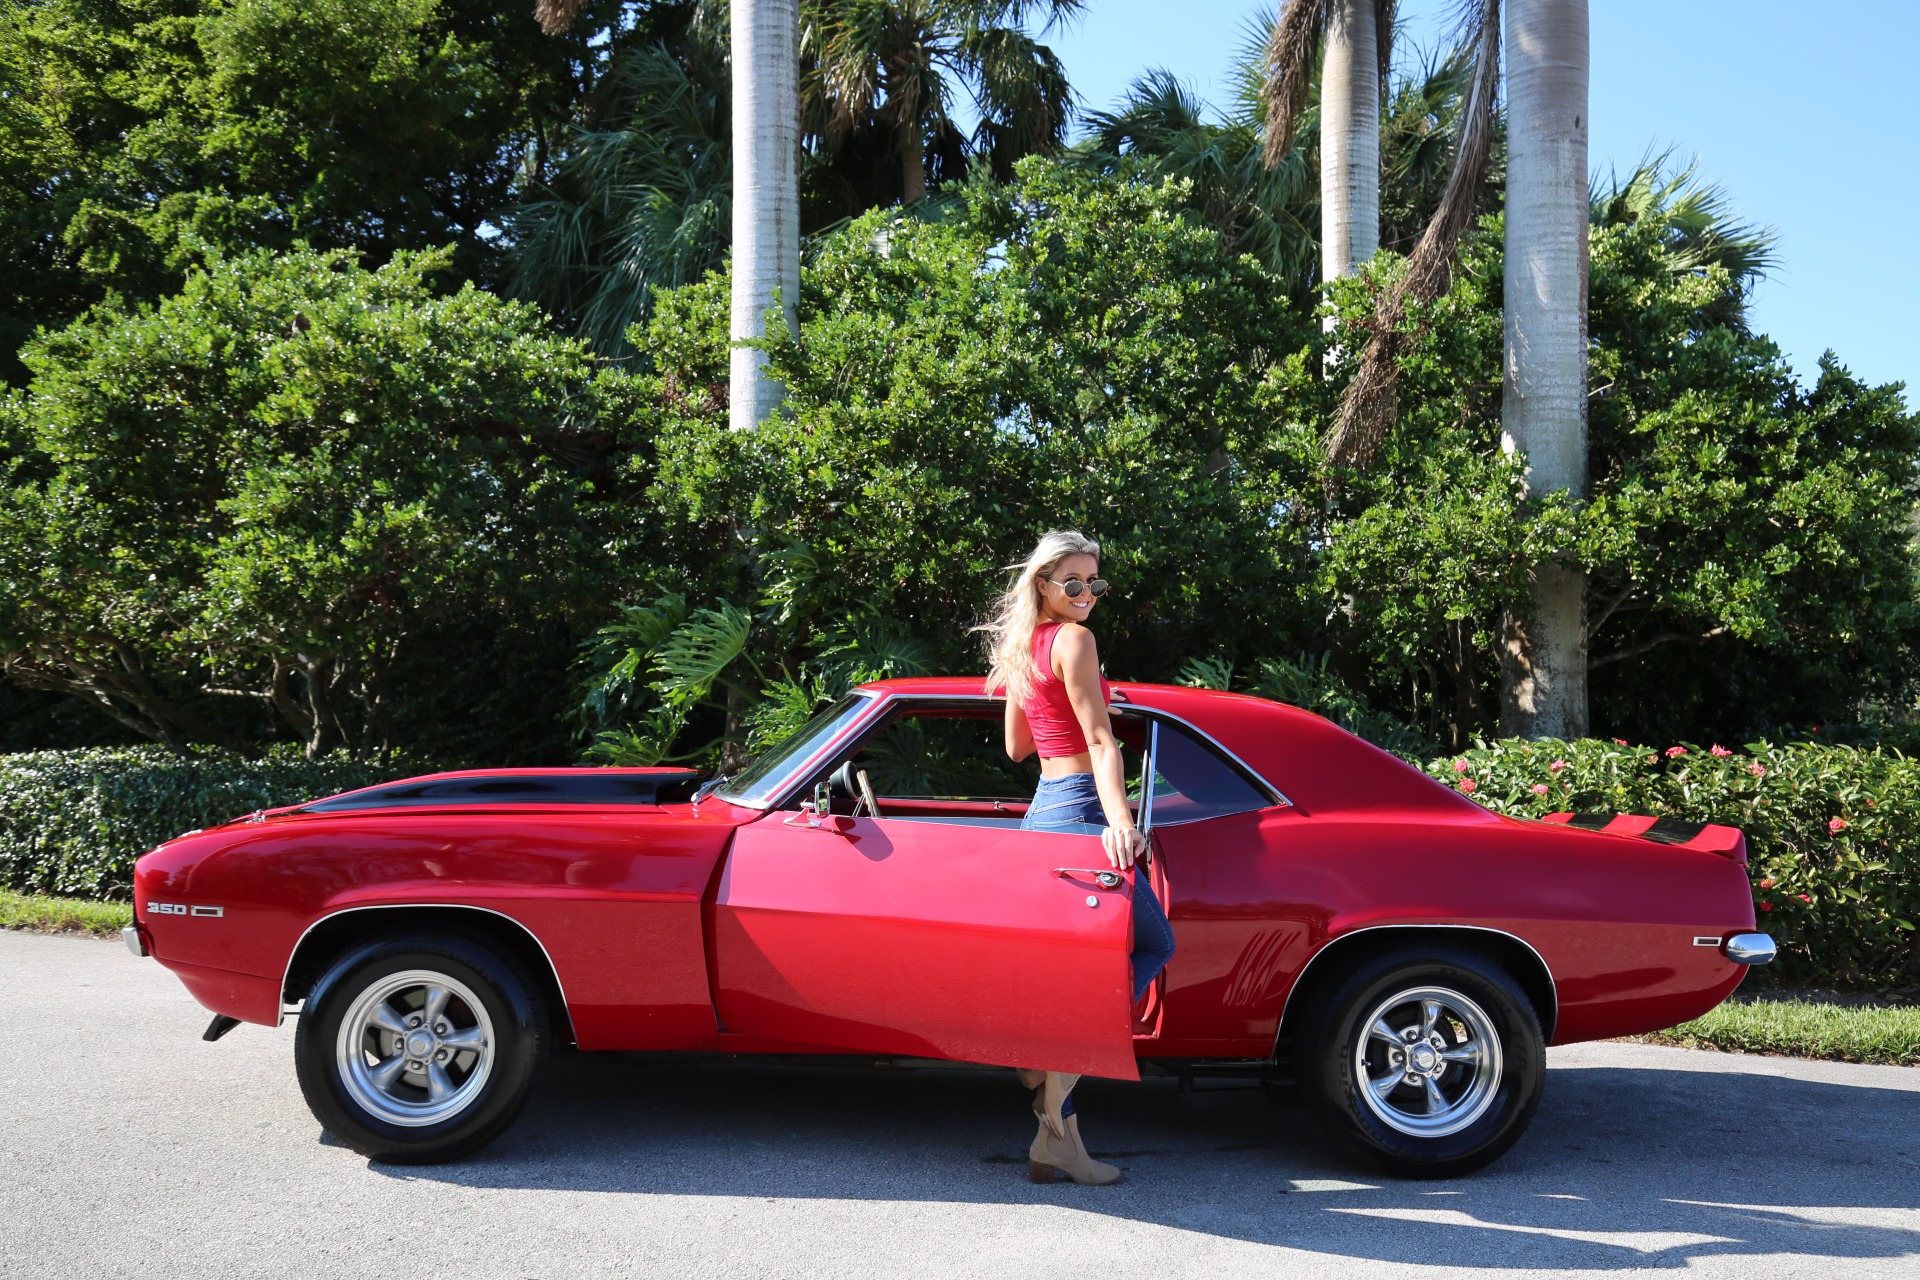 Used 1969 Chevrolet Camaro V8 Auto for sale Sold at Muscle Cars for Sale Inc. in Fort Myers FL 33912 4